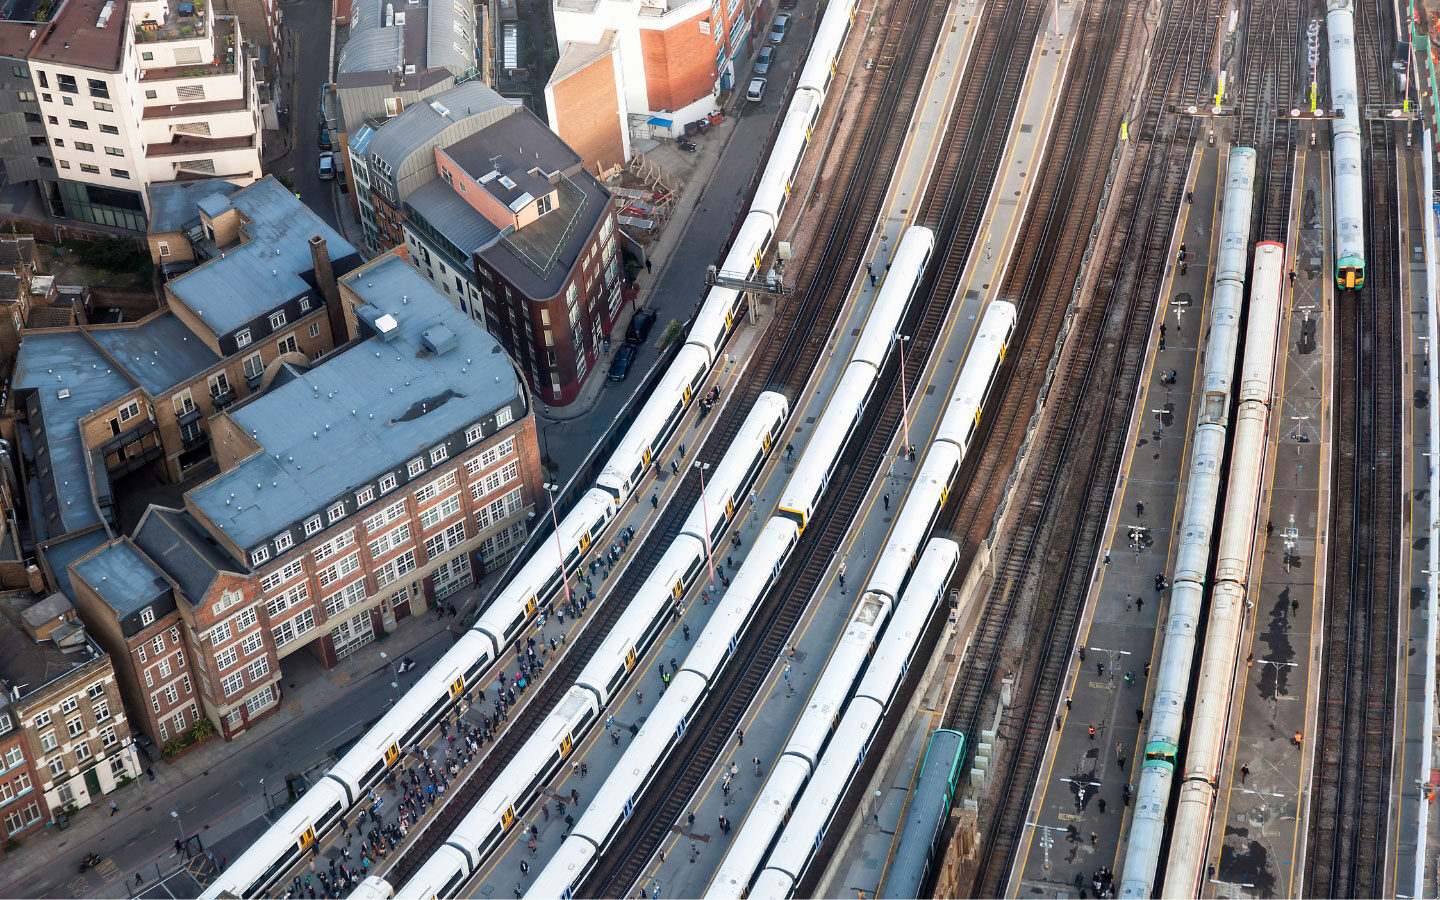 Trains at London Bridge station from above